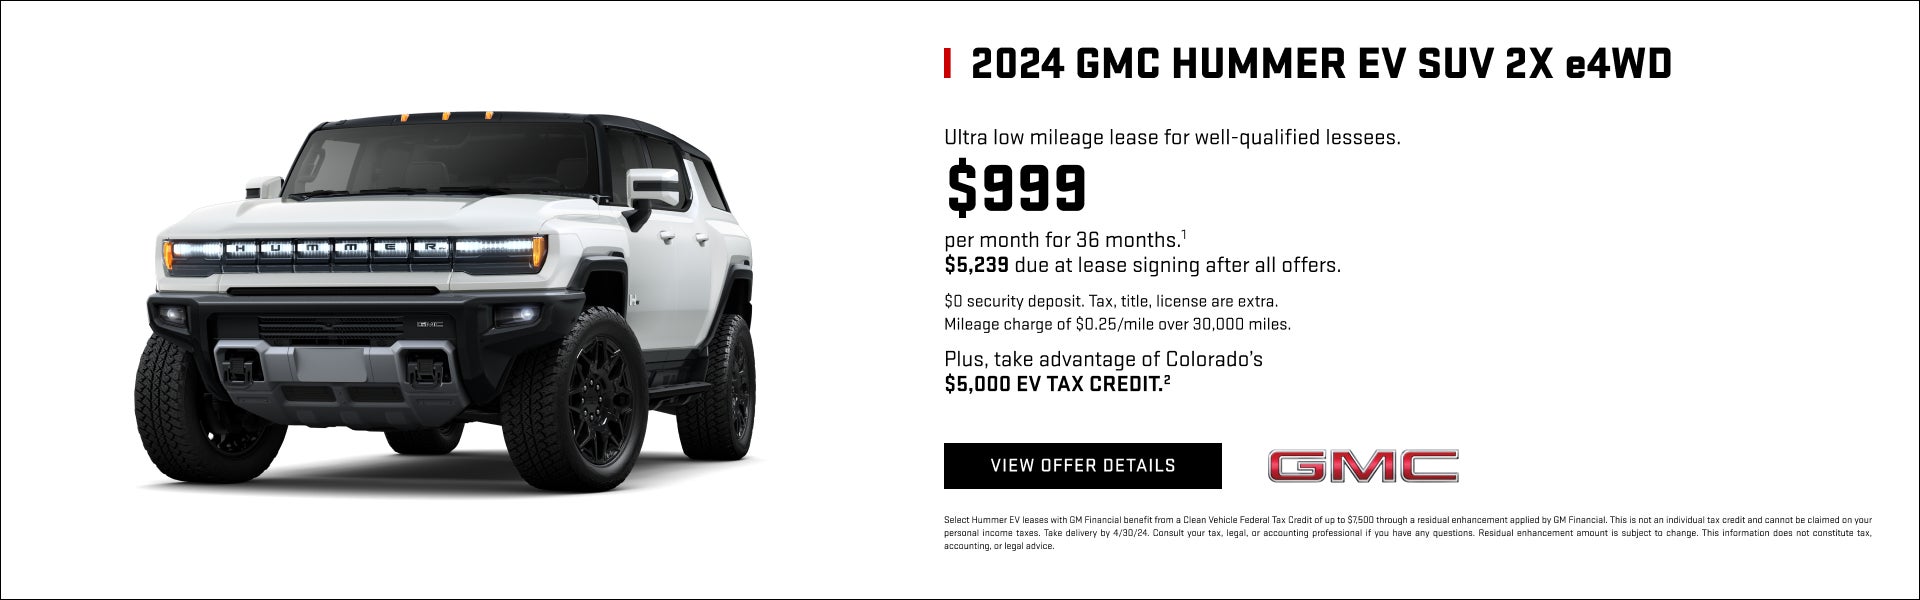 Ultra low mileage lease for well-qualified lessees.

$999 per month for 36 months.1 

$5,239 due ...